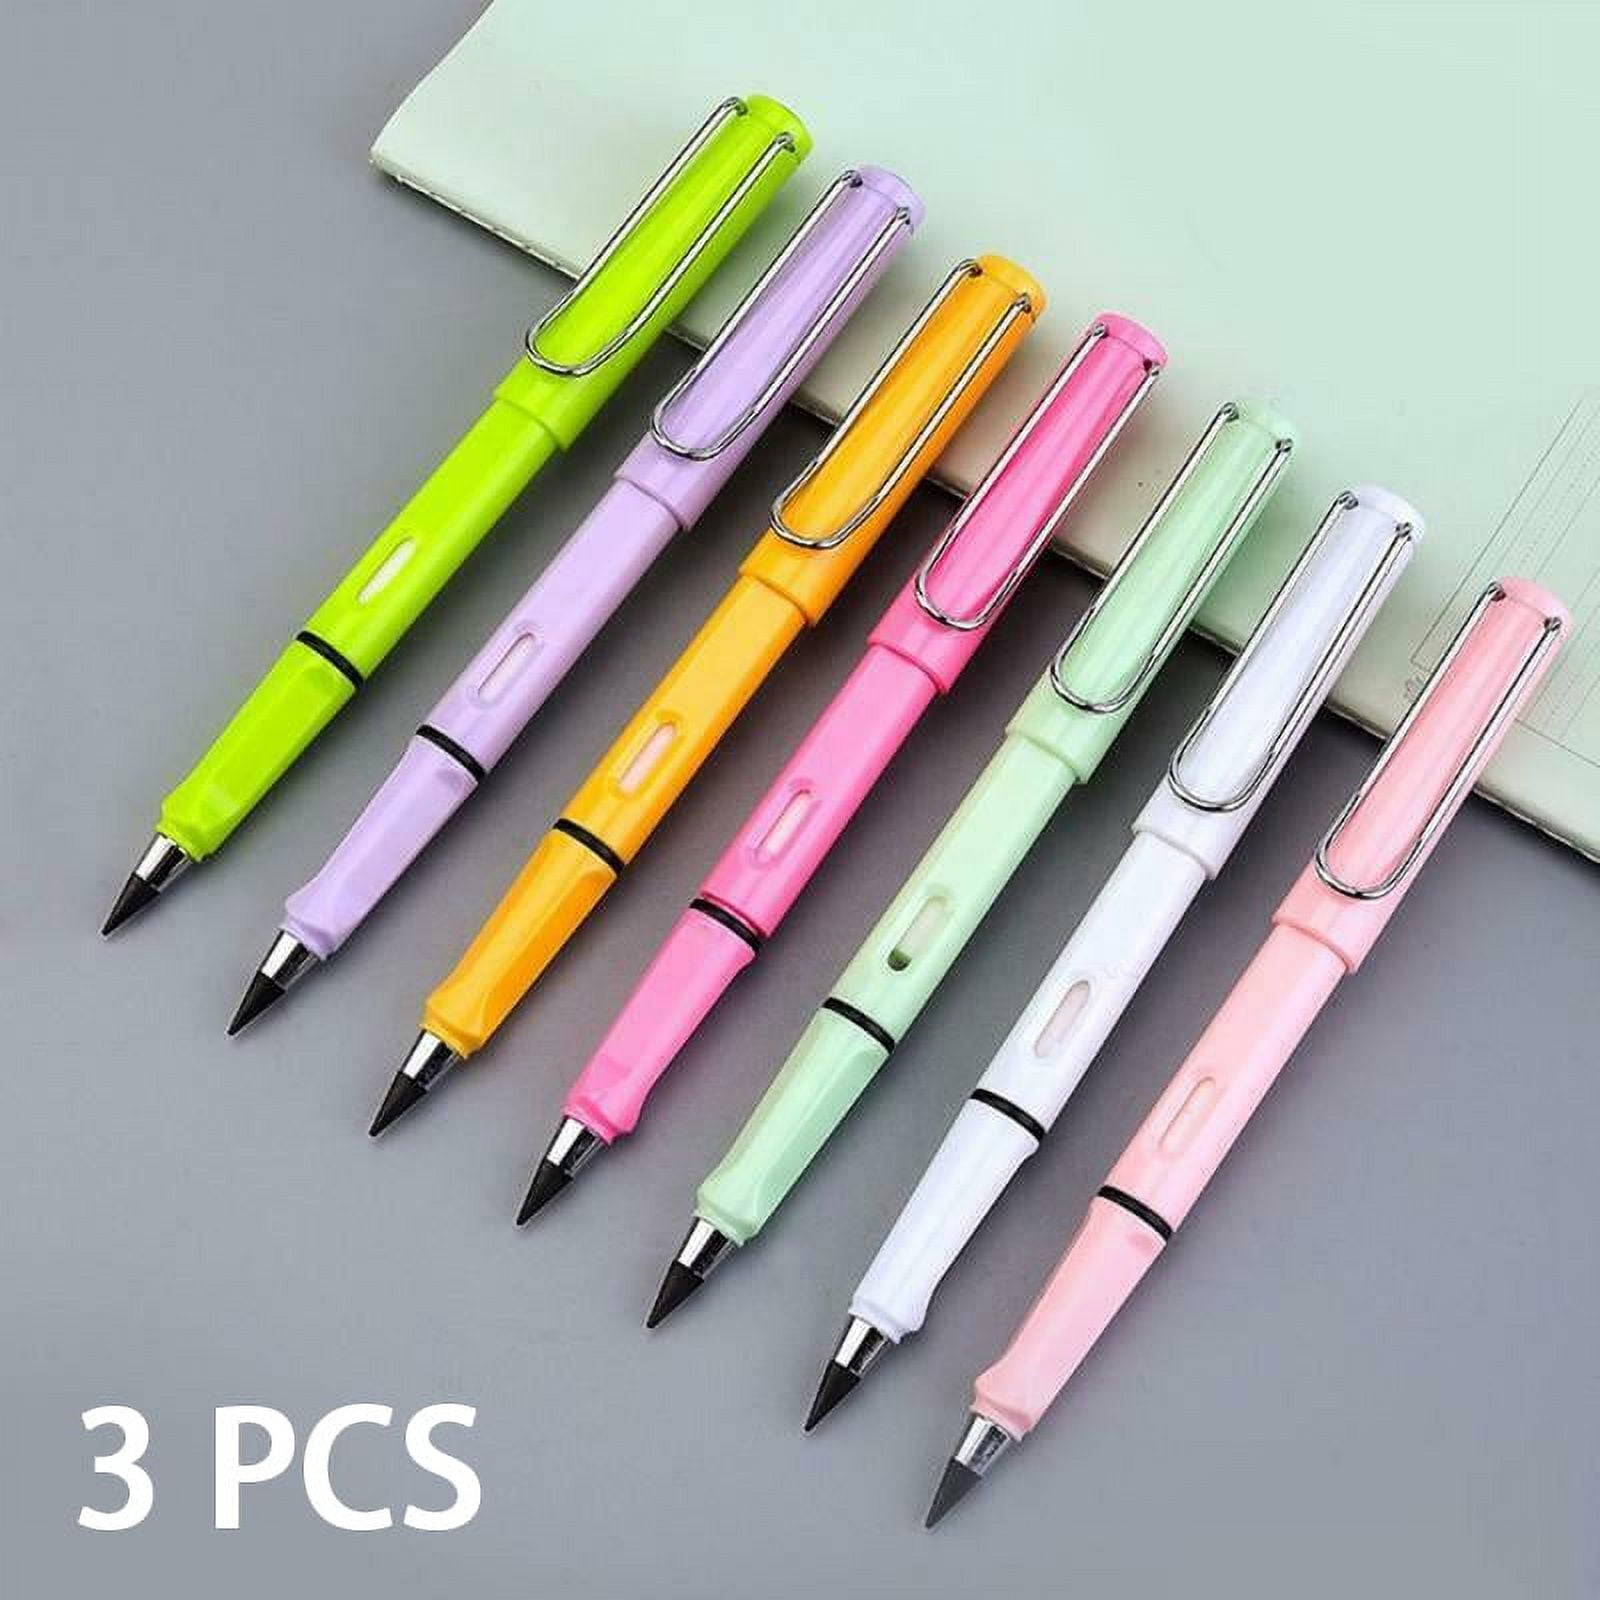 Topboutique Inkless Pencil,7PCS Everlasting Pencil Infinity Inkless Pencil  with Extra 7 Eraser Reusable Everlasting Pencil with 7 Replaceable